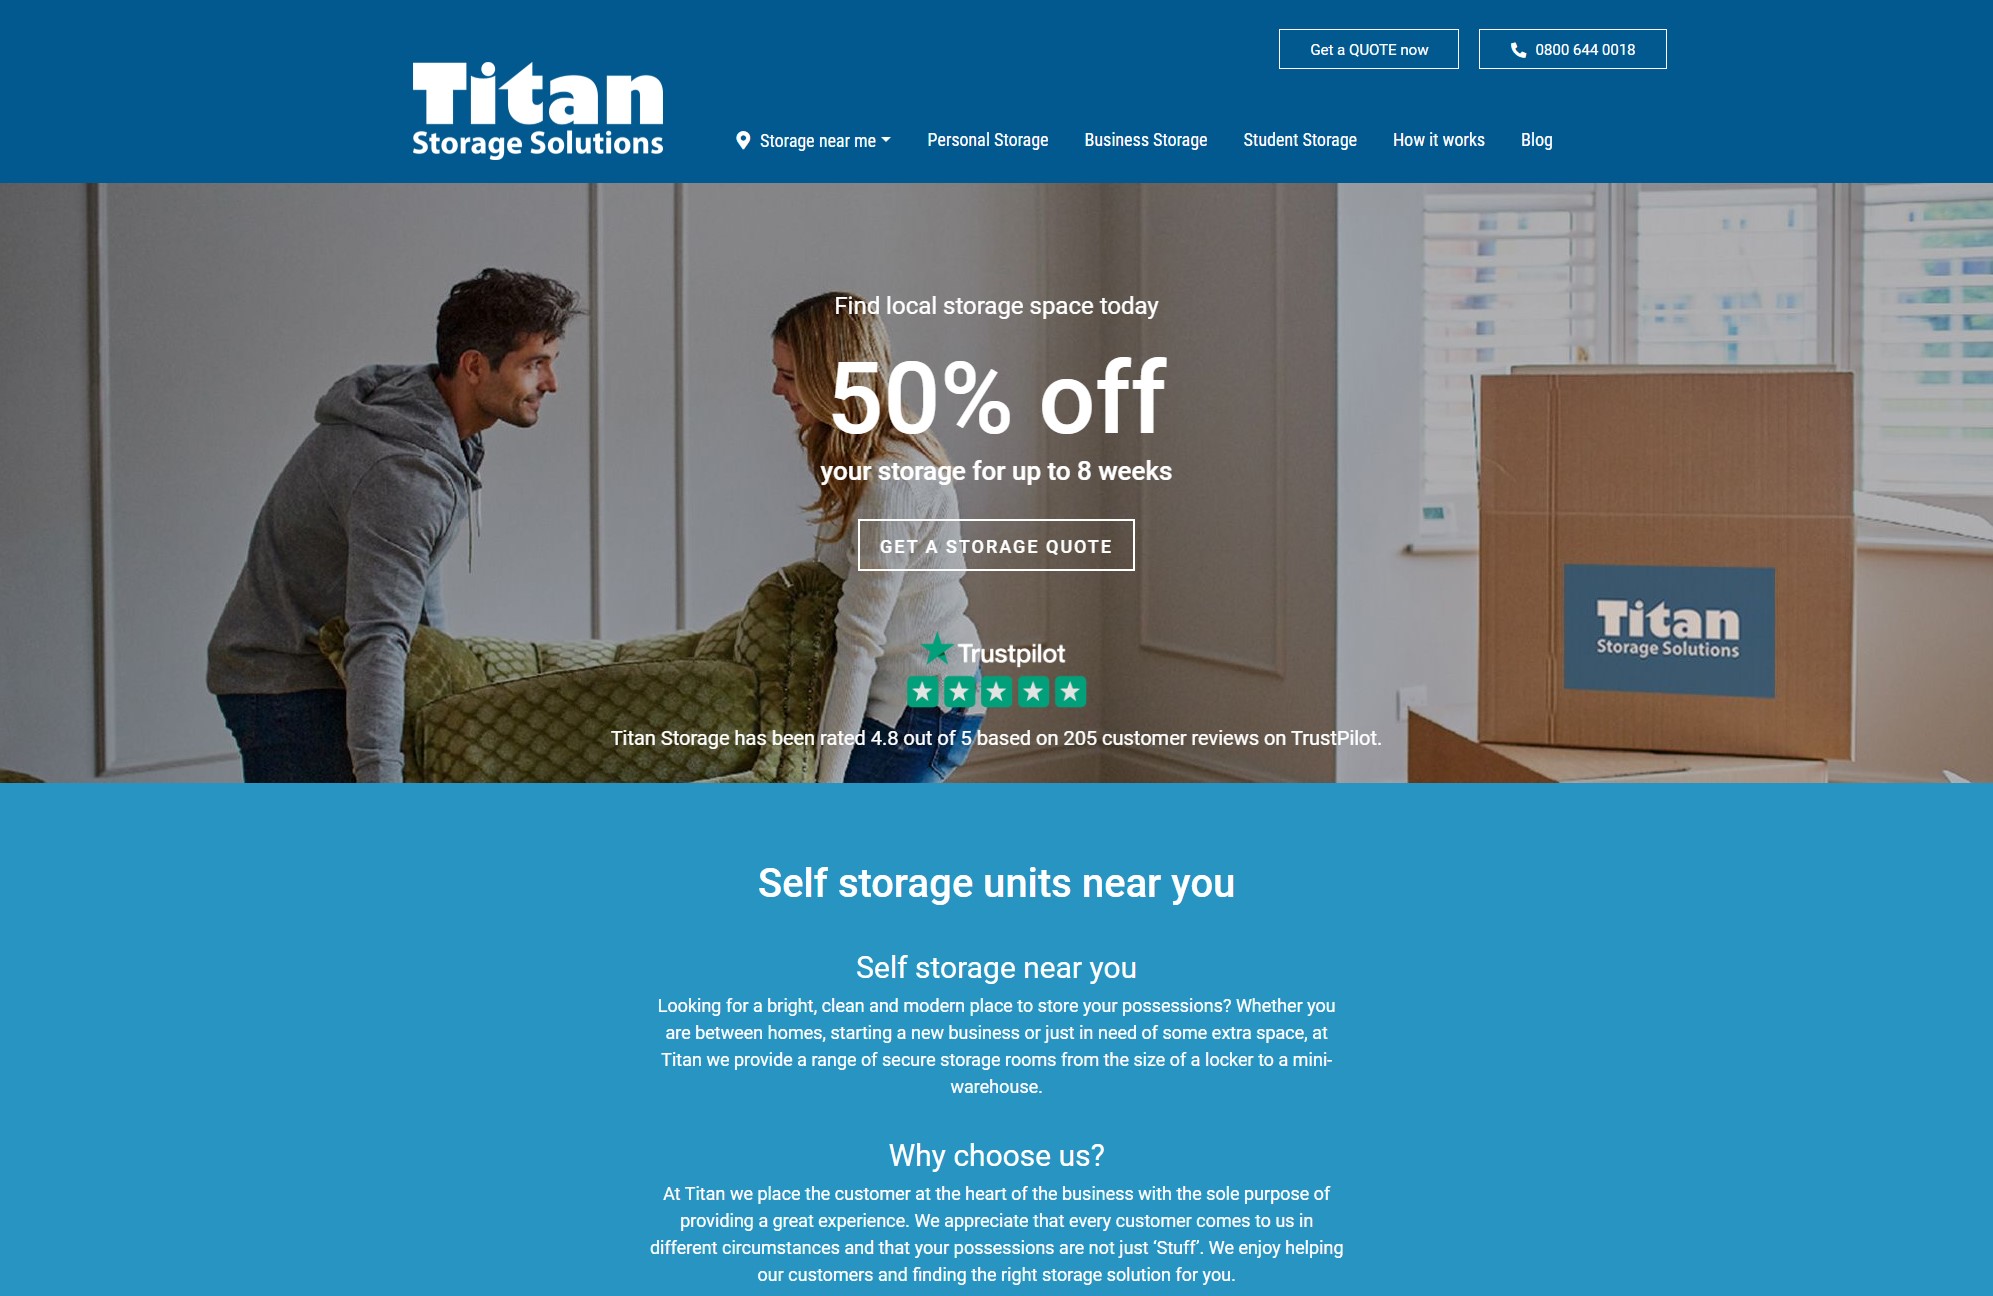 https://www.searchenginejournal.com/wp-content/uploads/2019/10/titan-storage-solutions-home-page-example-5dbbef237e7e3.jpg